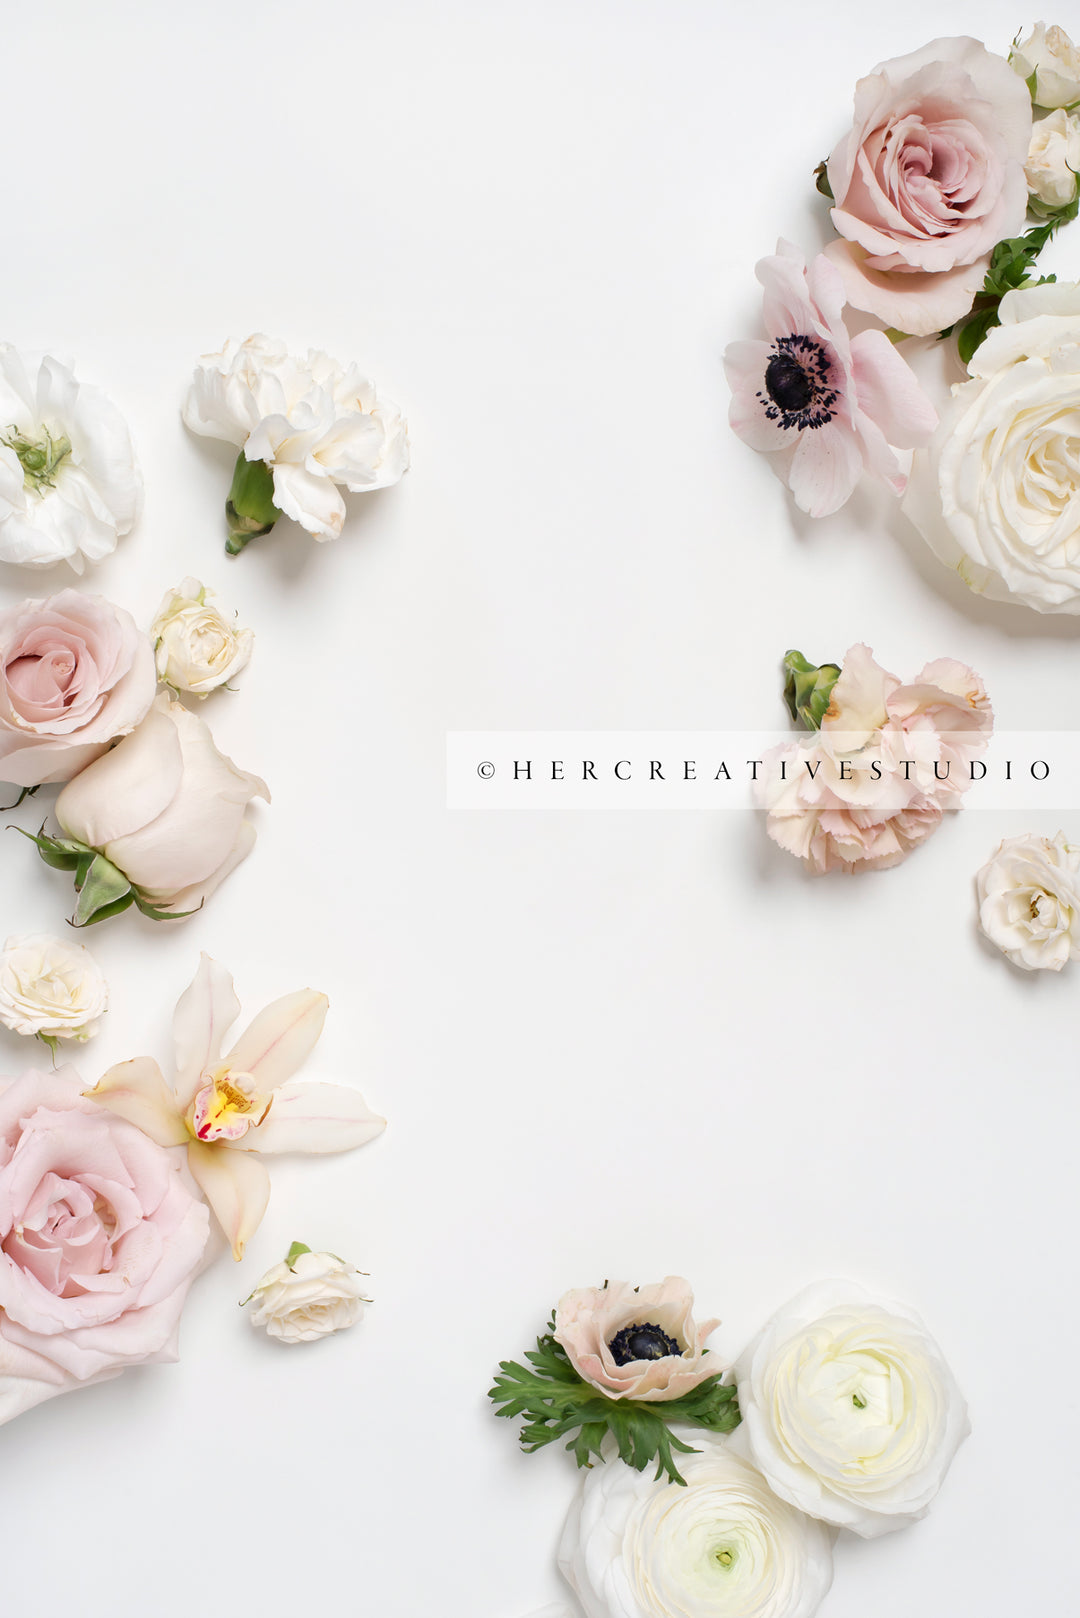 Roses, Orchids & Anemone on White Background, Styled Stock Image